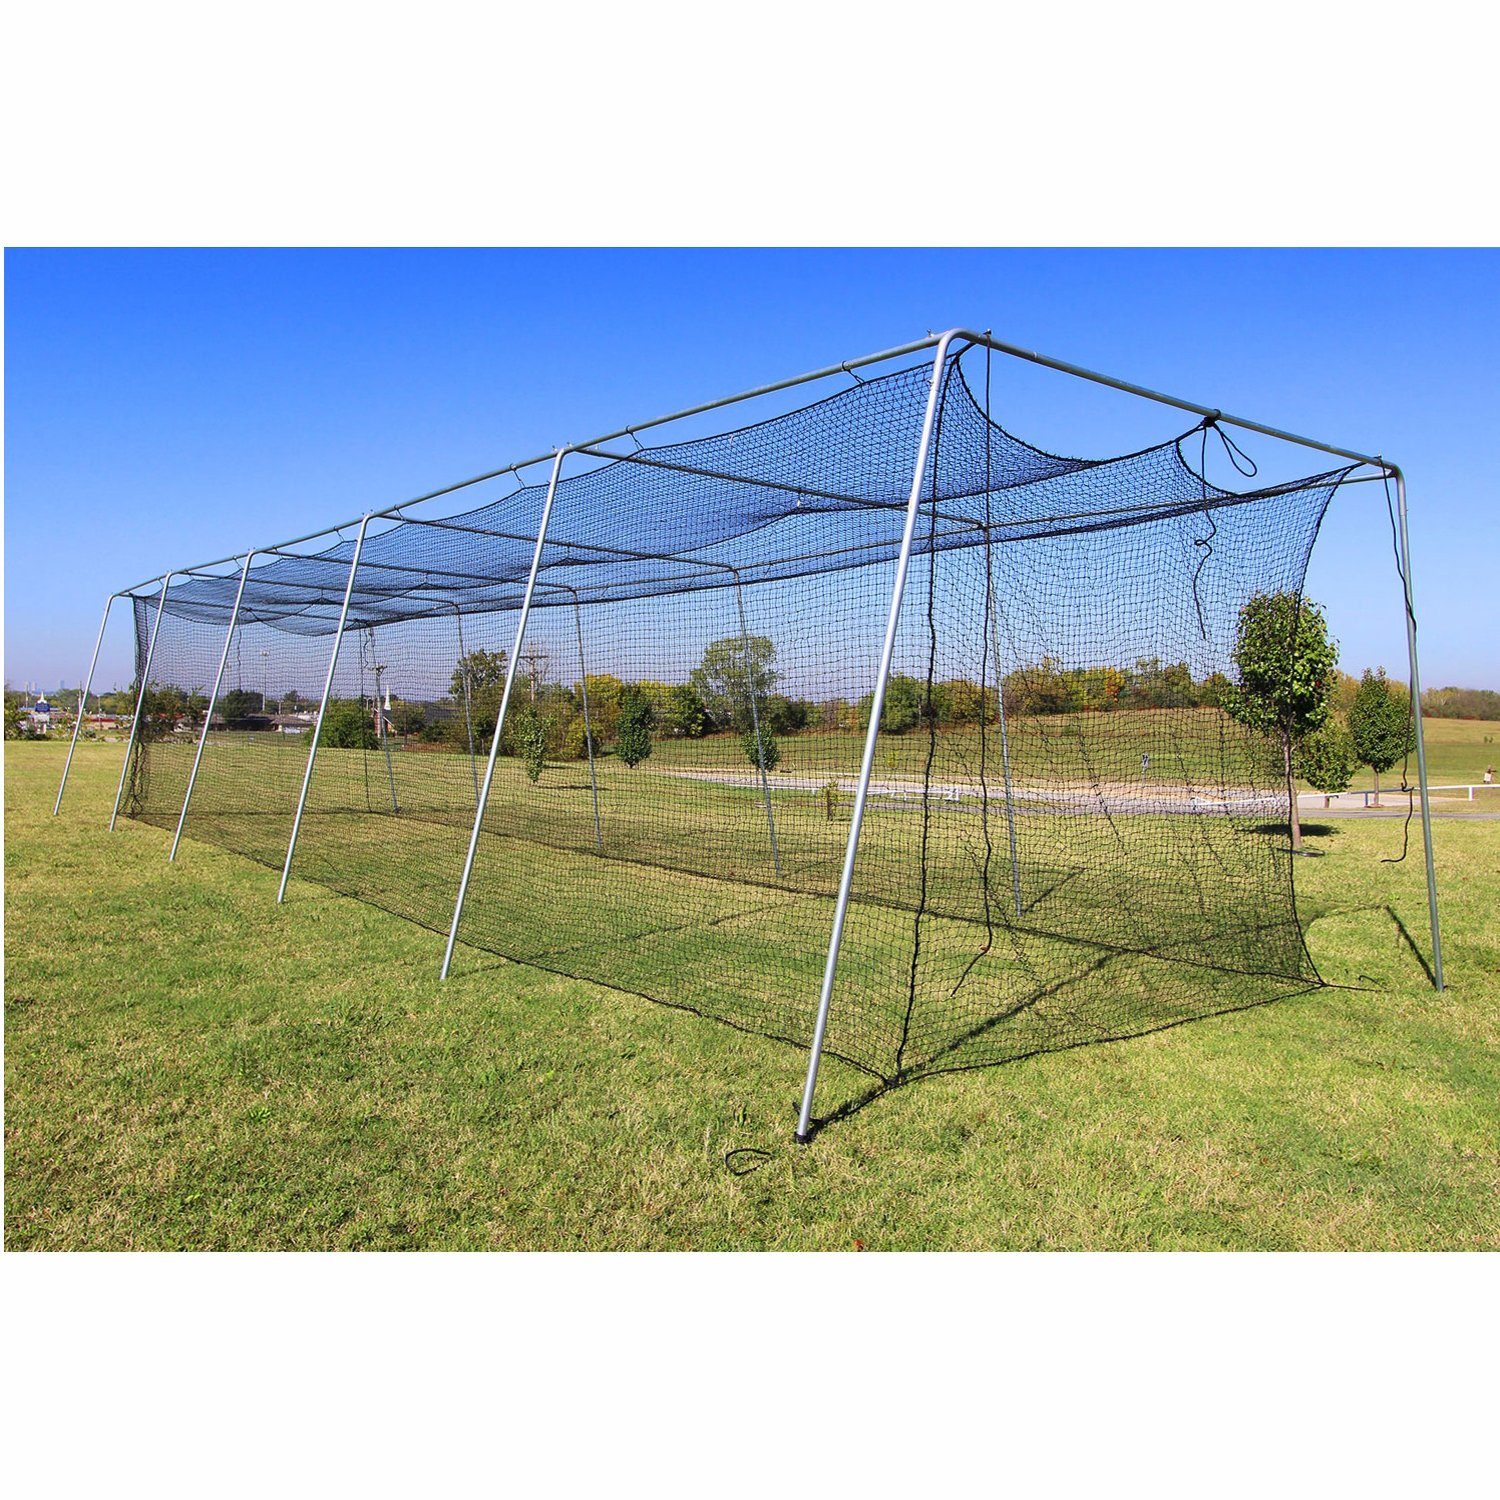 Cimarron Baseball 60' Complete Frame and Batting Cage Side View